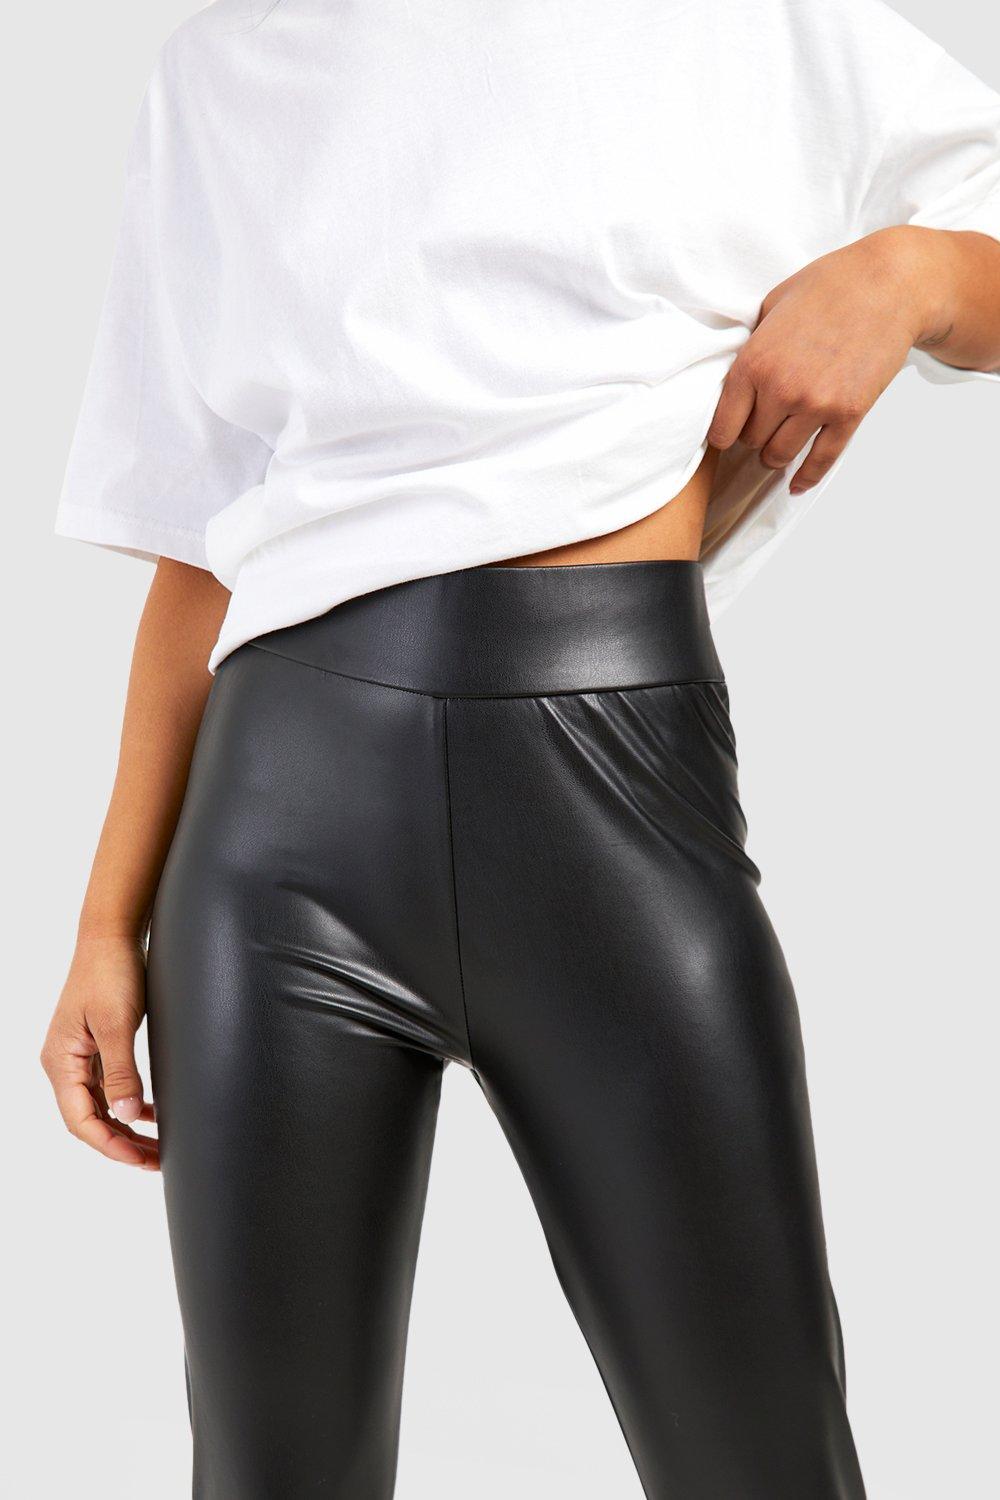 Petite Super Stretch Waist Shaping Faux Leather Leggings